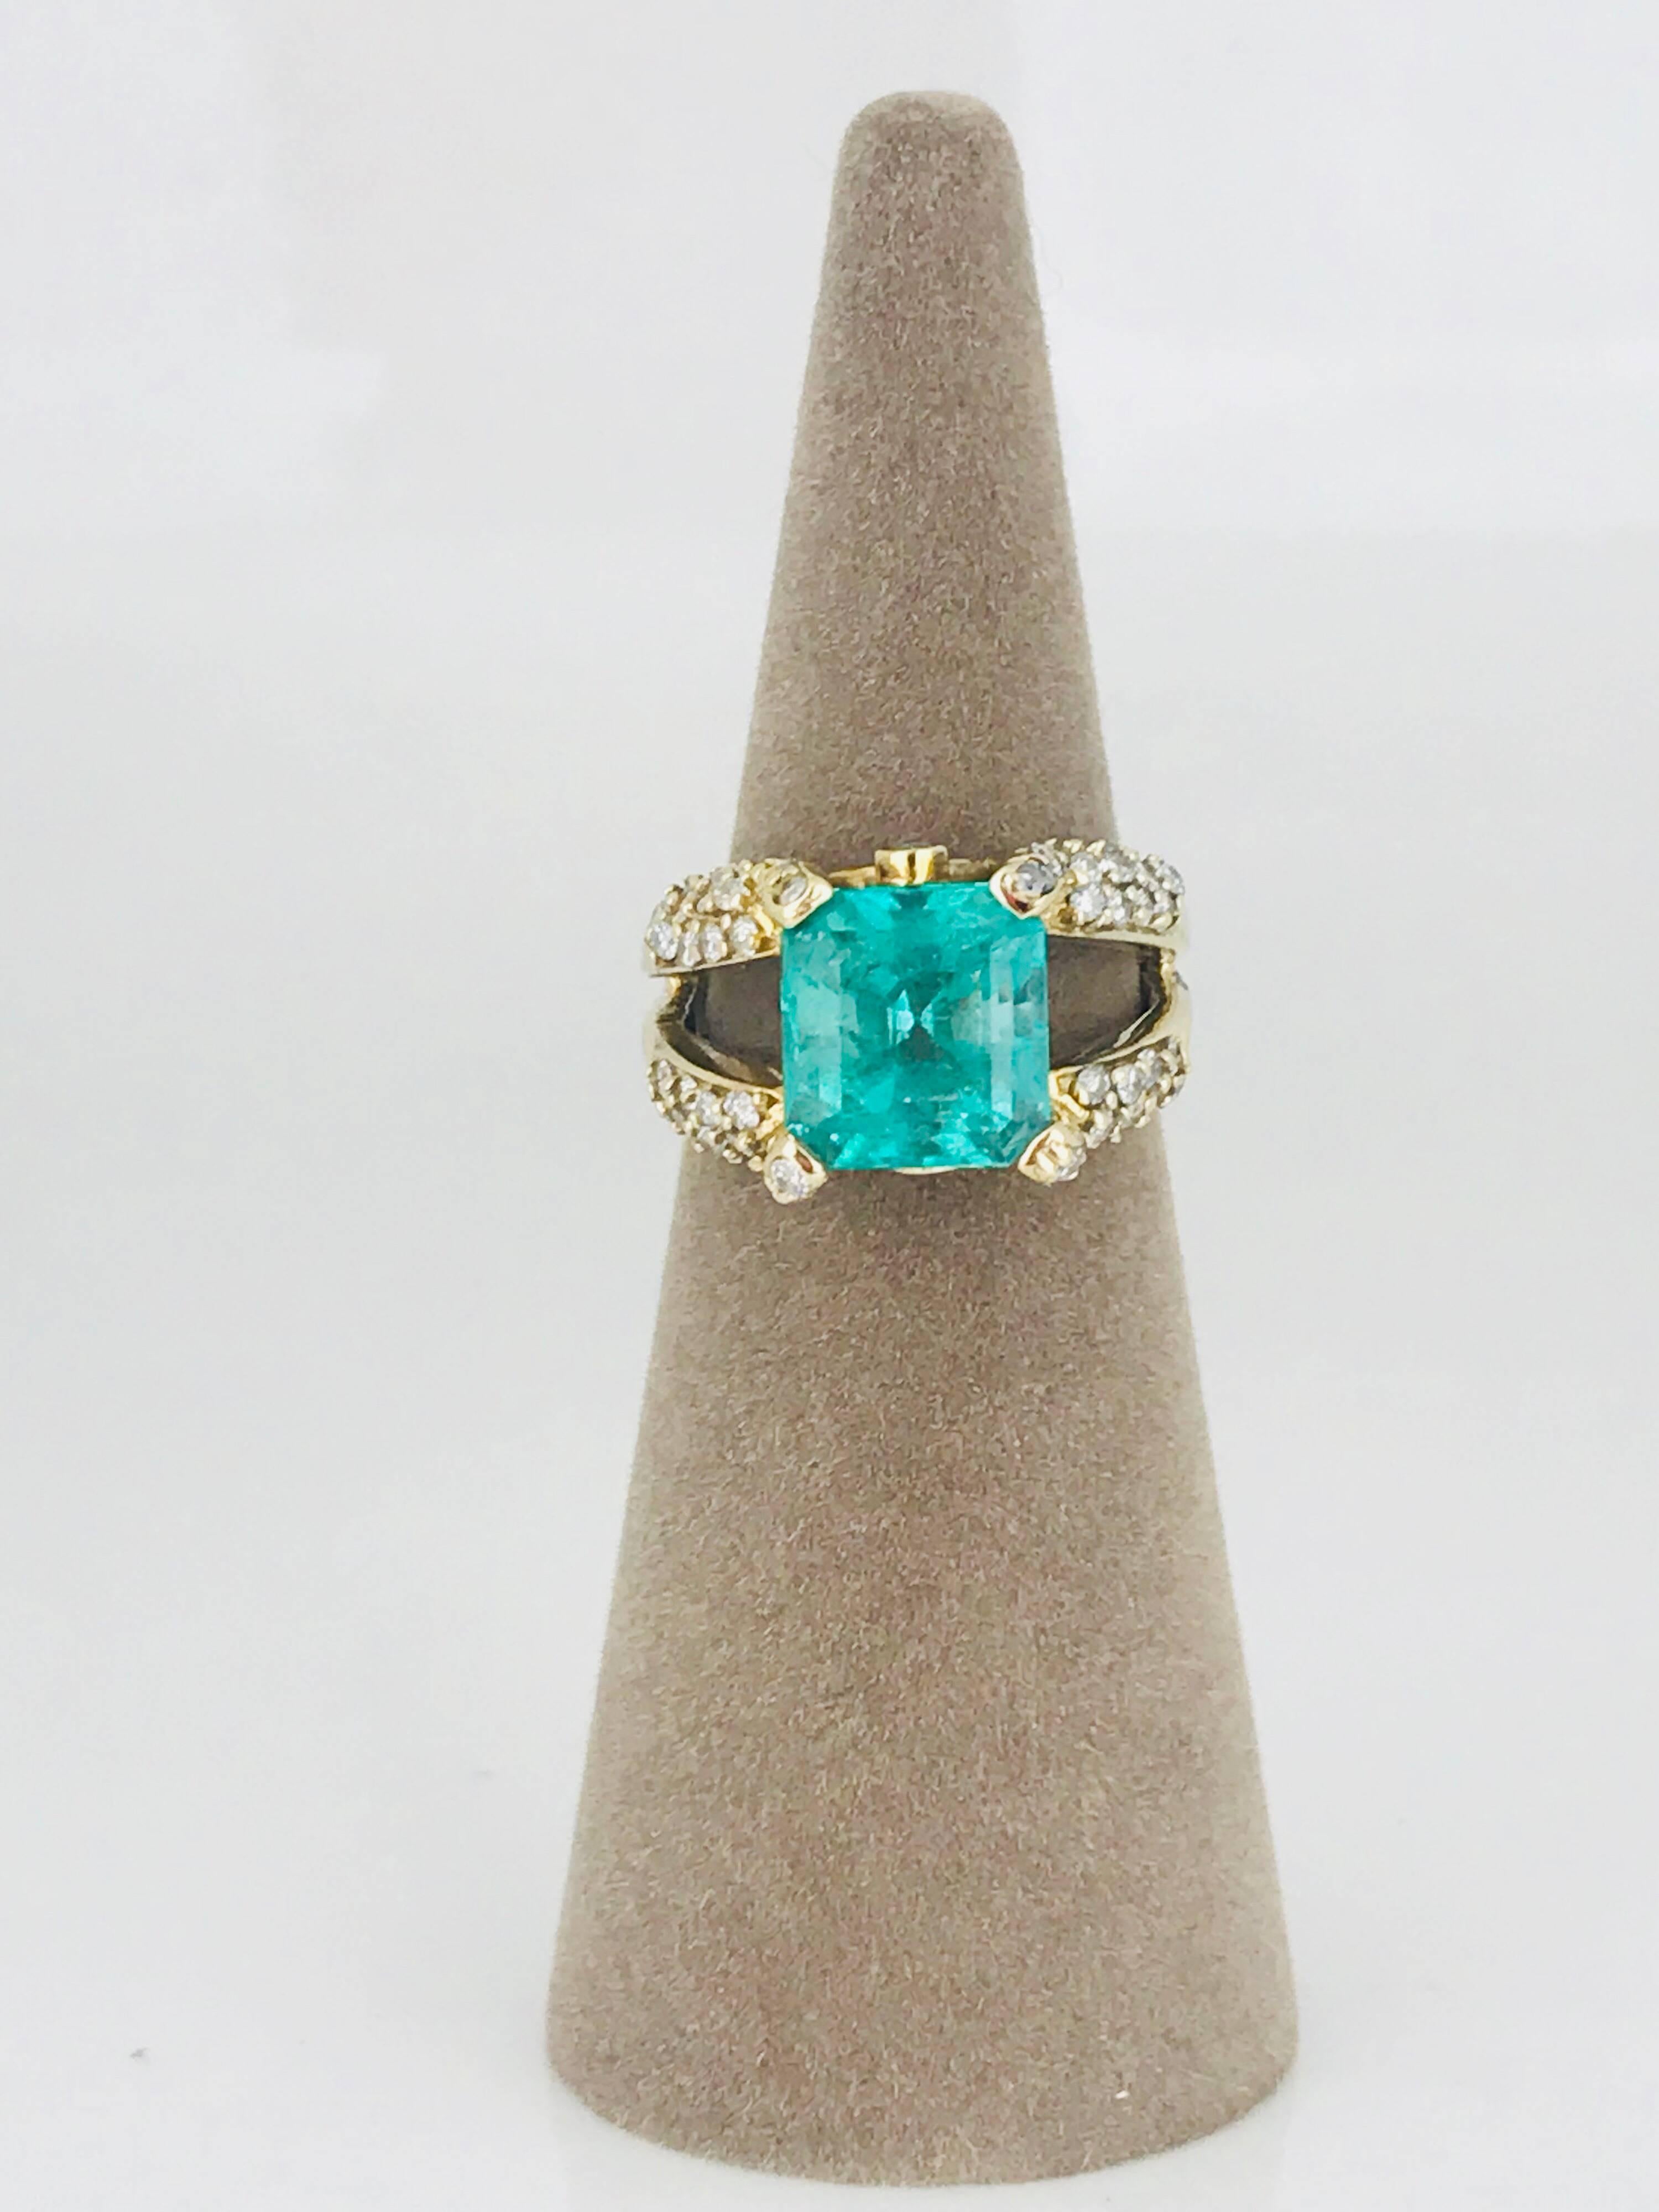 Contemporary designed 14 karat yellow gold ring features a large emerald-cut Colombian emerald with over-sized diamond pave-set prongs and split shank.  Dramatic open basket design allows maximum visibility for the emerald and is embellished with